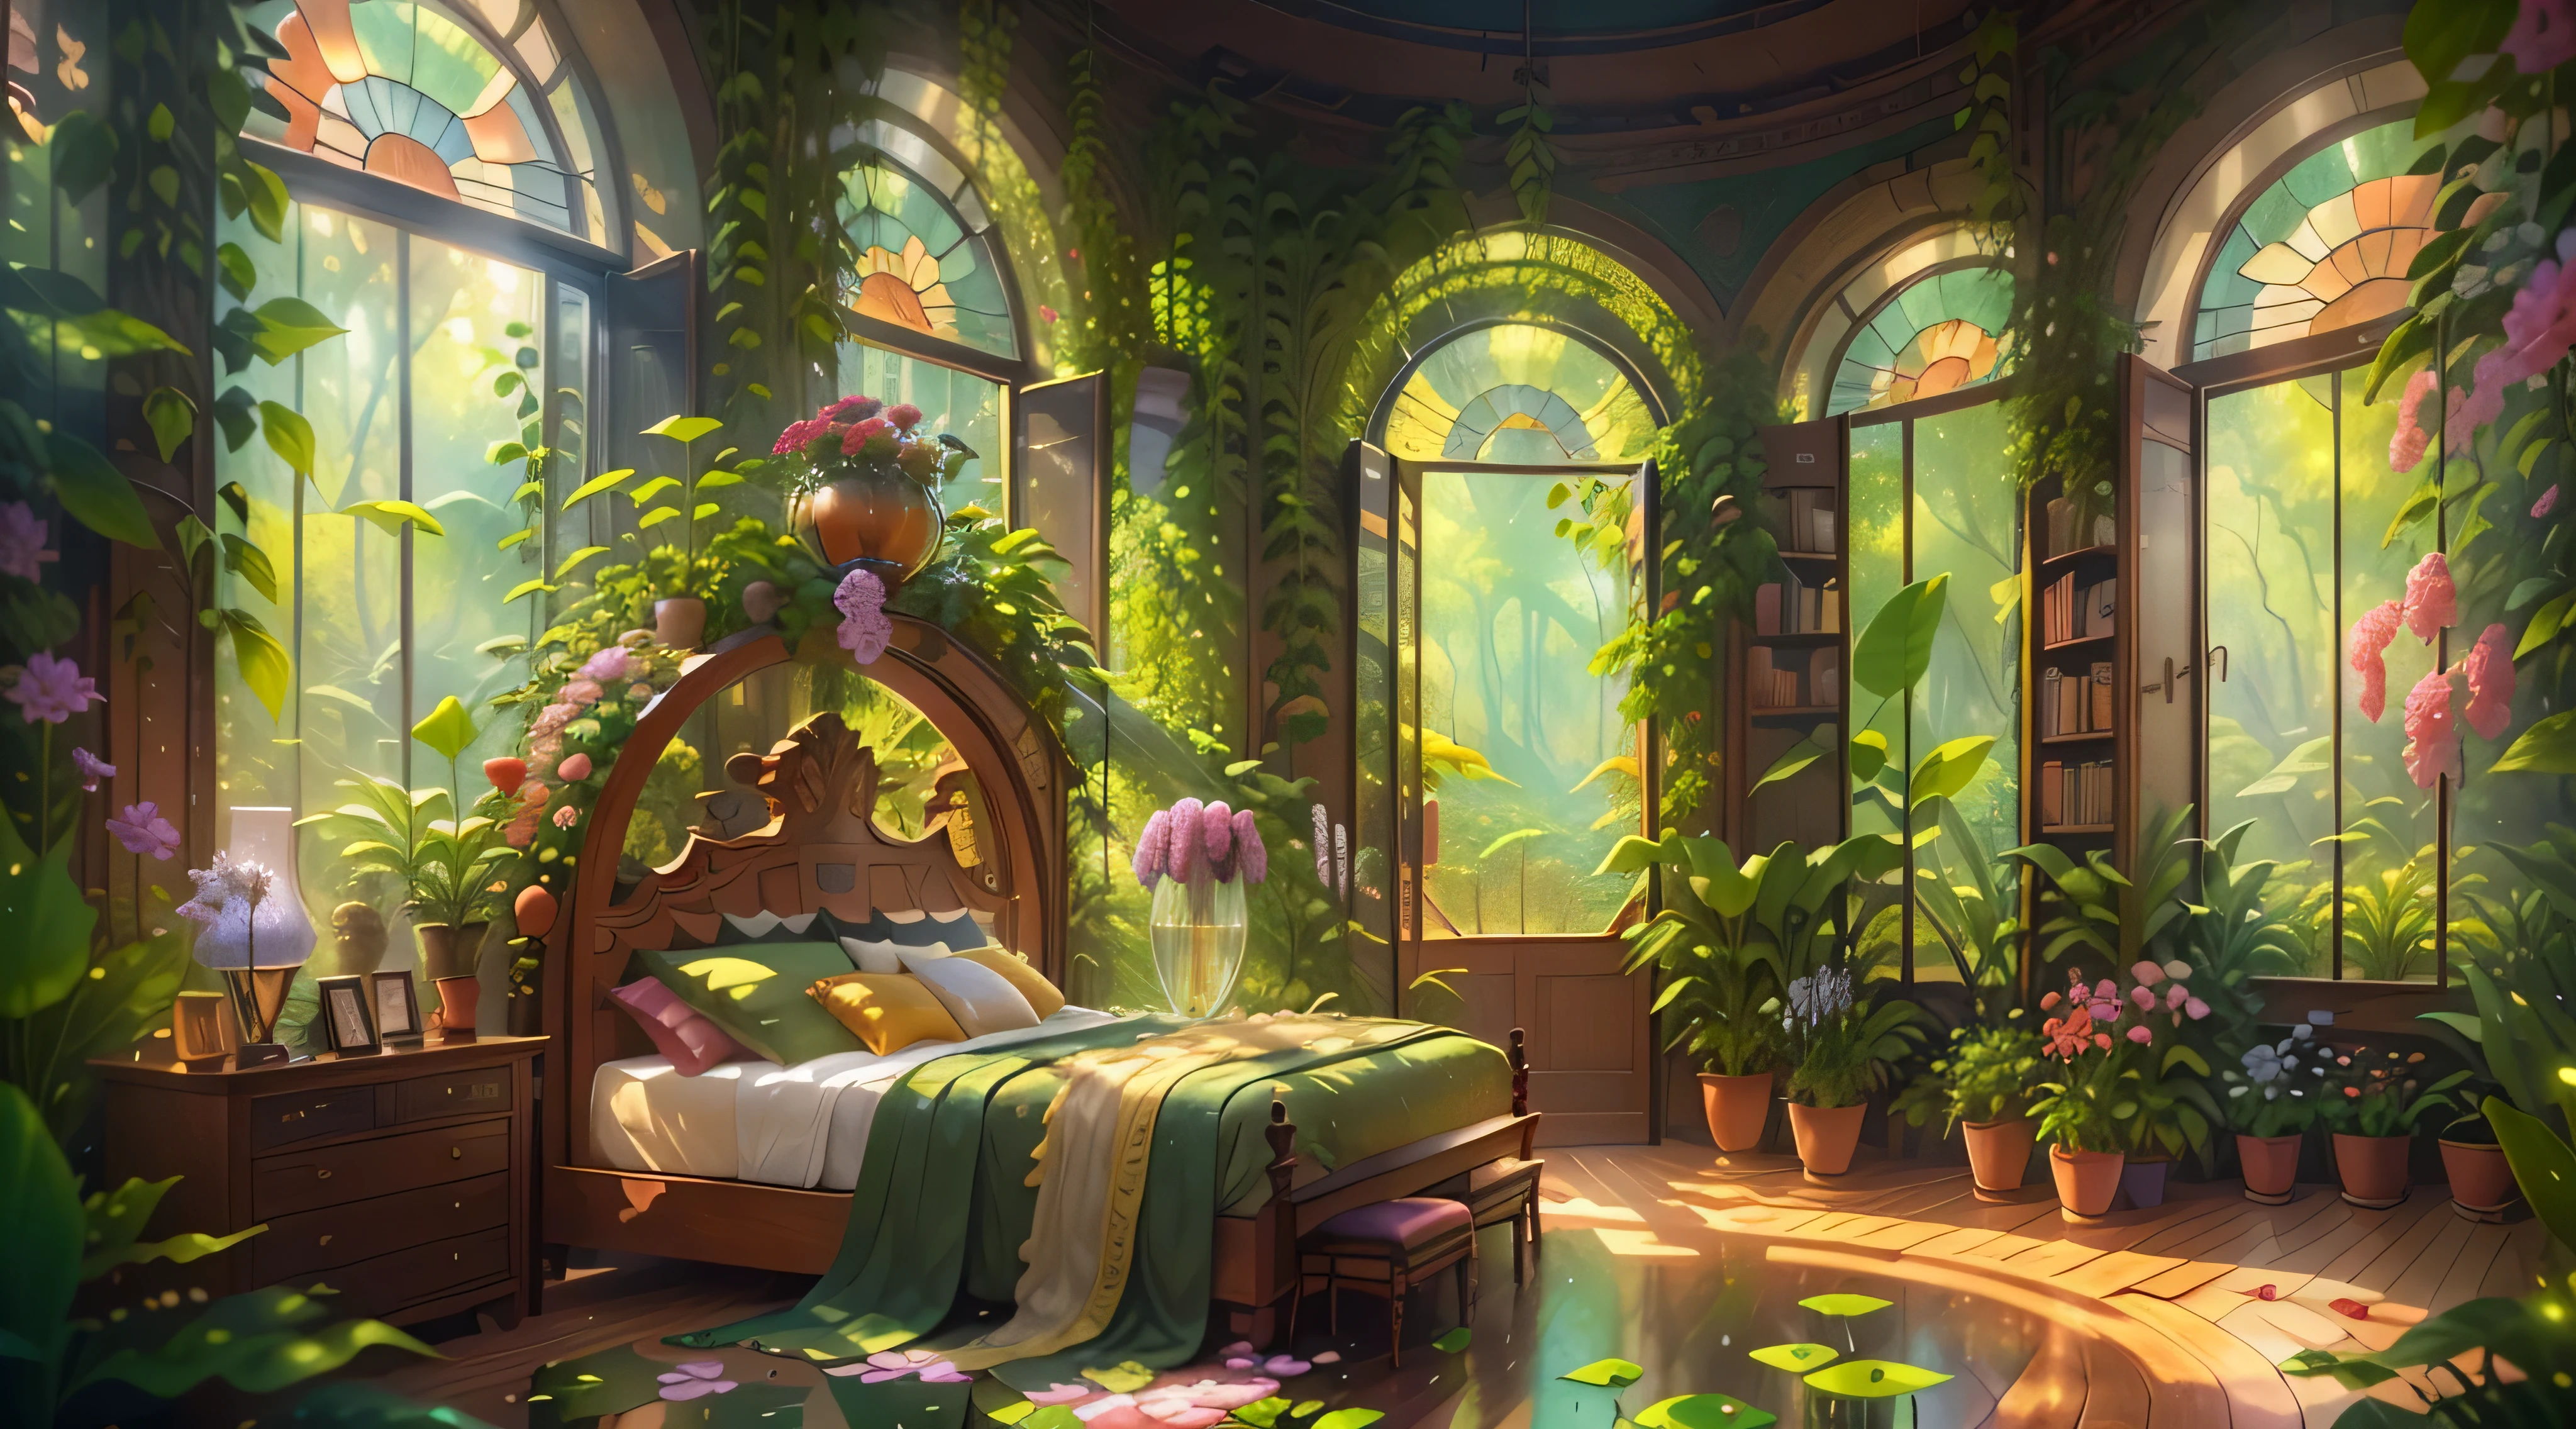 Solarpunk dreamland: royal botanical reserve | Create a gorgeous Versailles-style plant-based bedroom in a solarpunk world. There is a giant Historically window in the bedroom. The giant French Historically window is adorned with intricate carvings and dominates one wall. through huge windows, Extremely colorful、Intricate solarpunk cityscapes clearly visible. The cityscape is bustling and interesting, Lots of little details and a lot of visual interest. The bedroom is very quiet, There are lots of elegant flowers and ivy among the rich silk fabrics and hardwood floors. Take inspiration from rooftop gardens, french royal garden, The beautiful, and whimsical fantasies. Includes The beautiful fantasy details and touches, Includes fantasy water, Books, 3D touch, and delicate tendrils of ivy. Cameras: Utilize innovative lighting techniques to emphasize the current and beauty of the image. Delicate petals dance in the air. Create eye-catching images with dynamic composition. (hyper realisitc), (current), (naturals), (obsessed), (enchanting), (Historically)